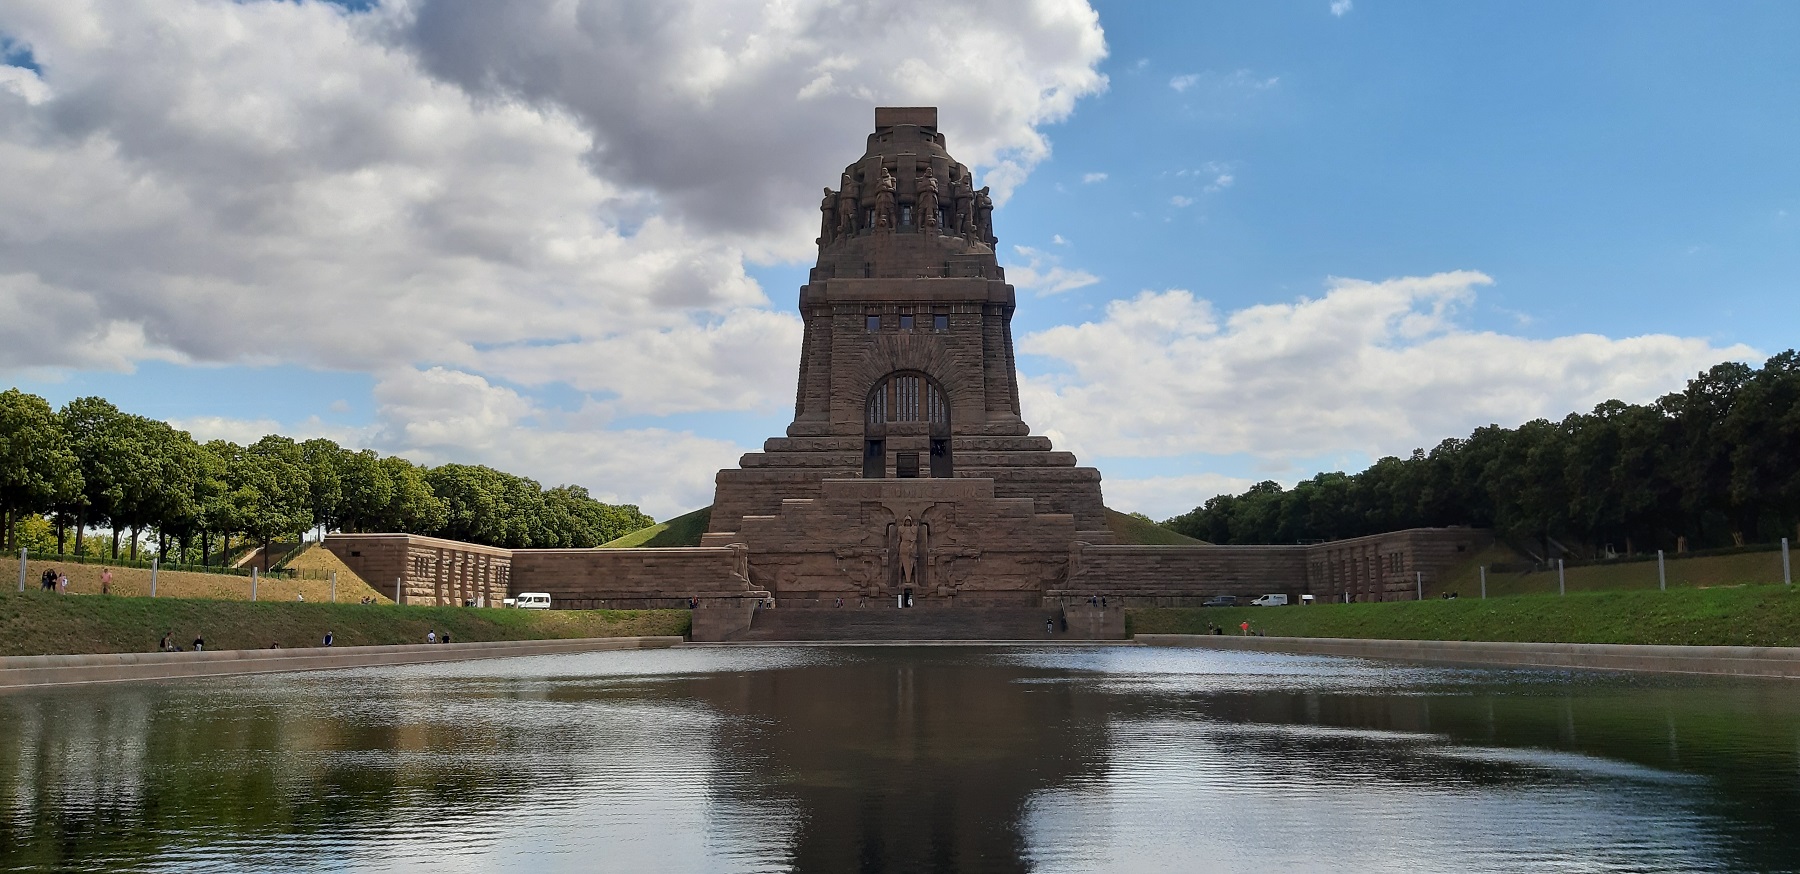 Monument to the Battle of the Nations, Leipzig